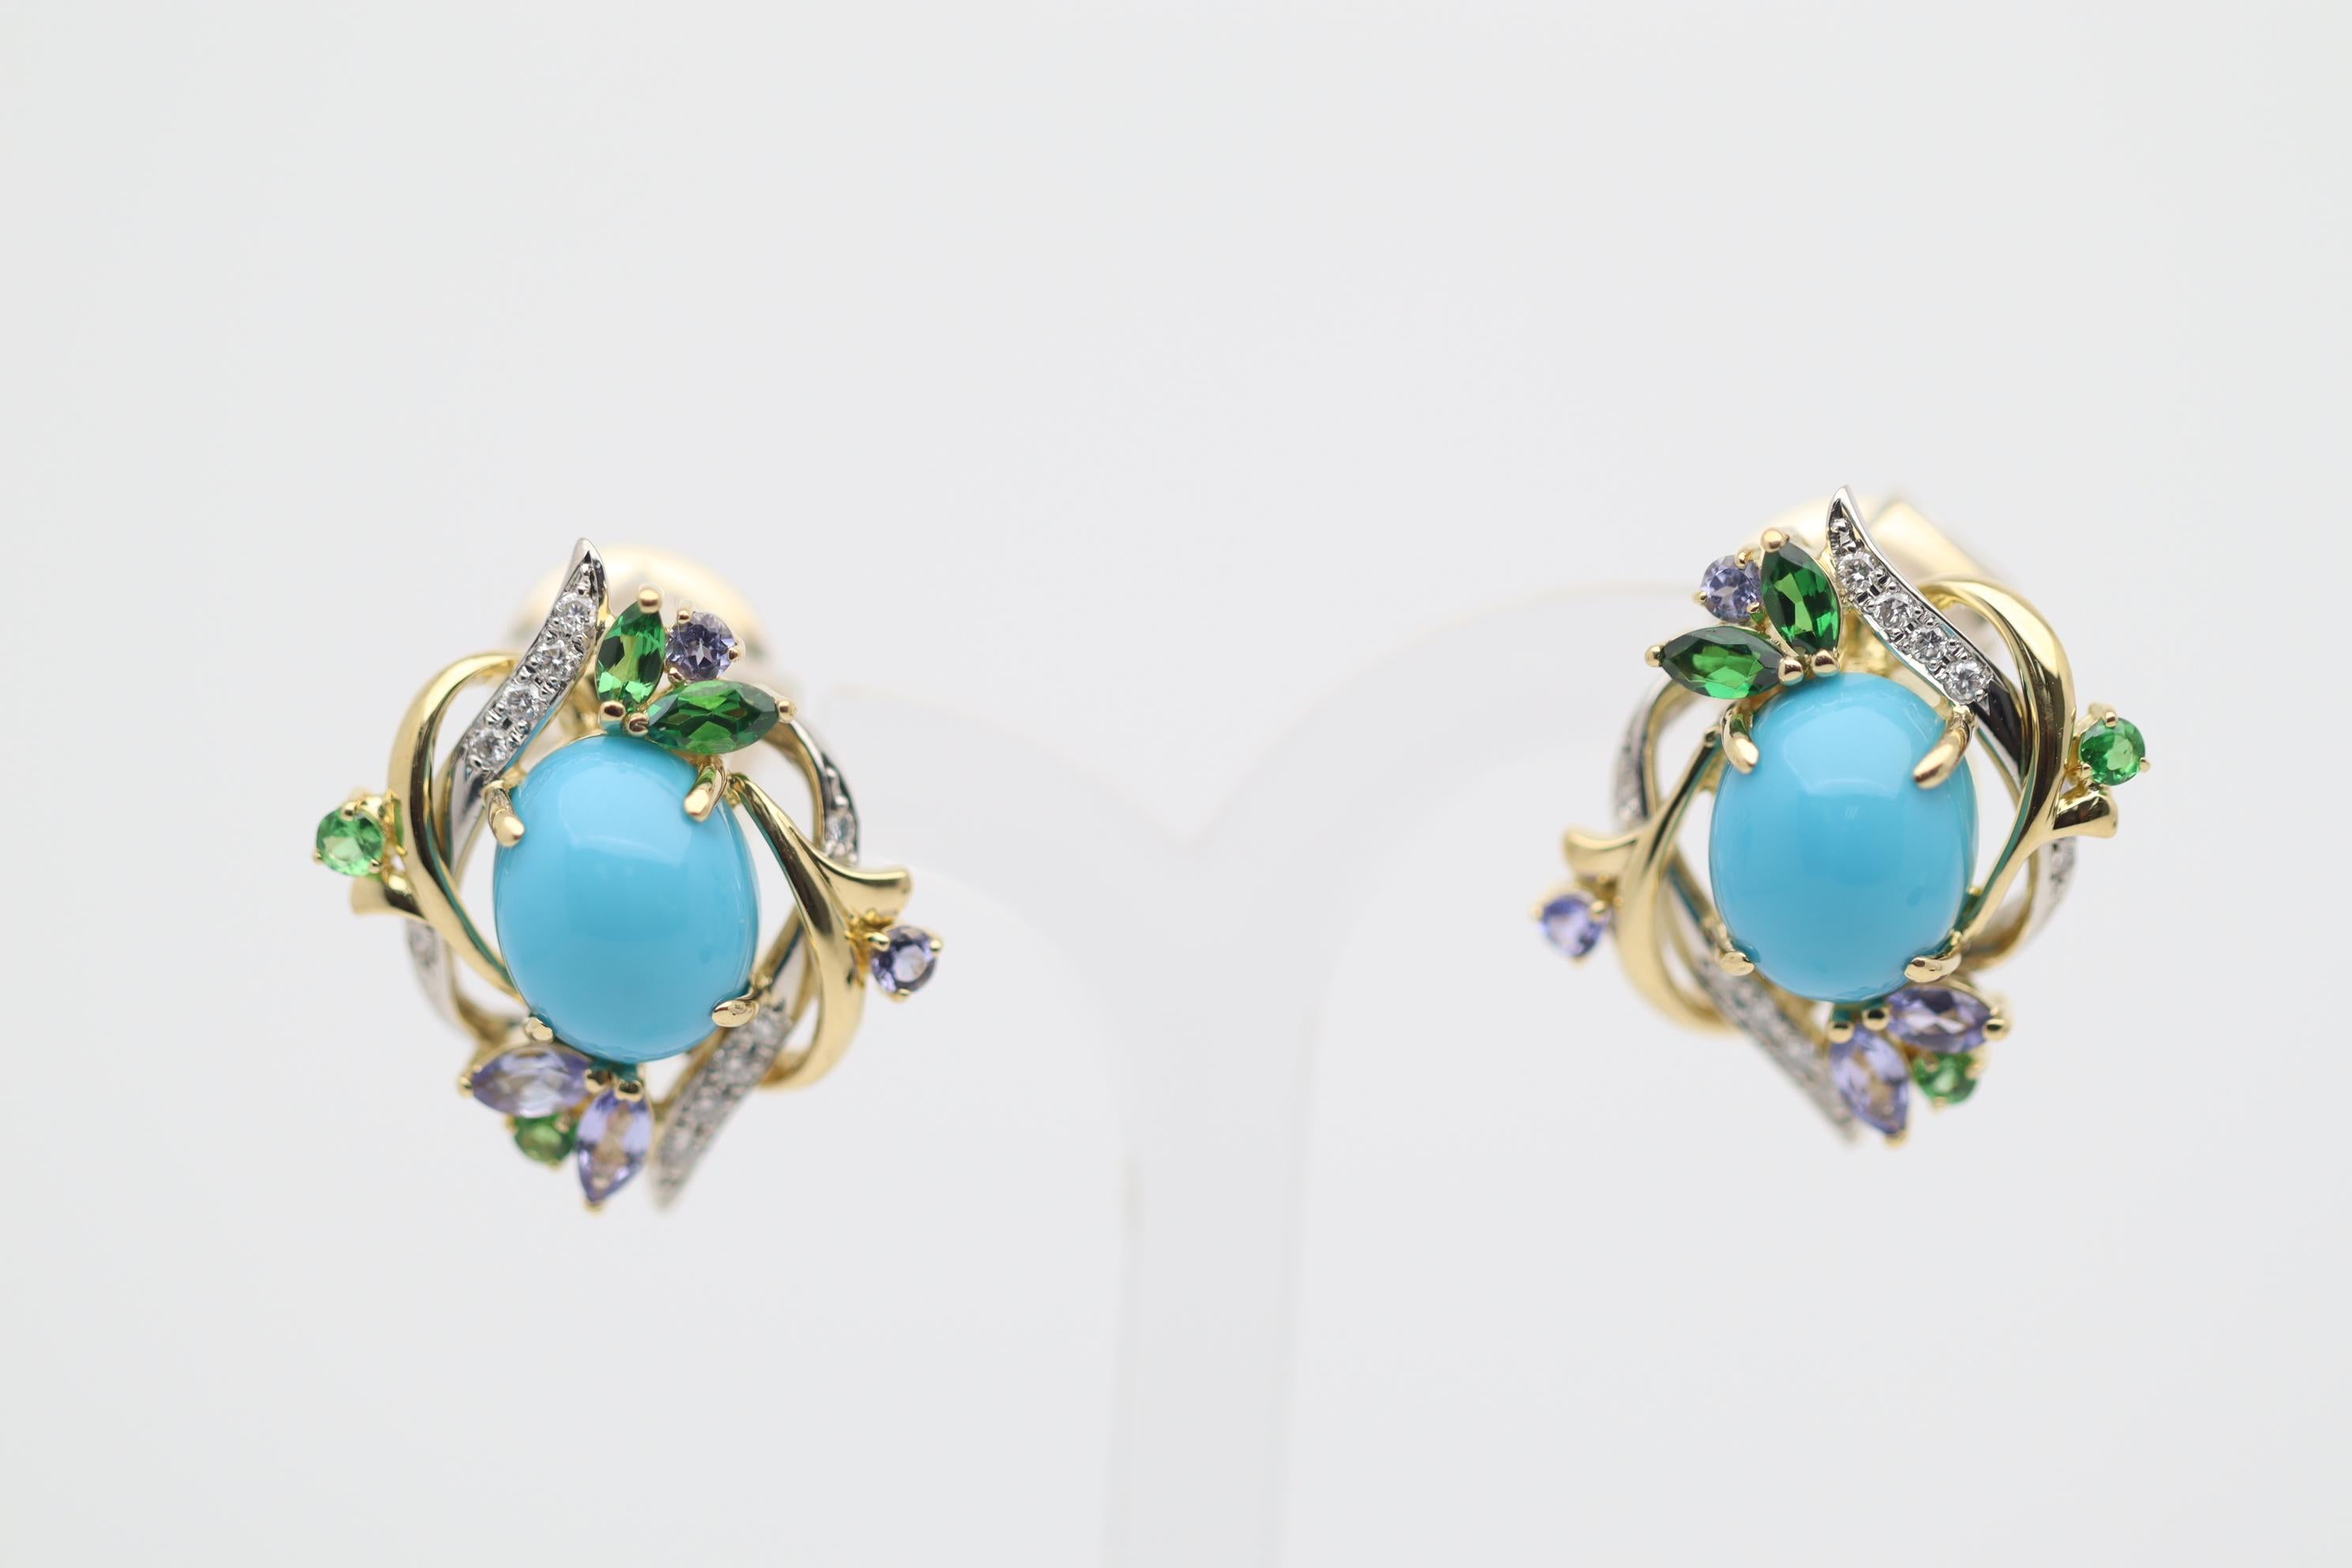 A fun and beautiful pair of earrings featuring two pieces of fine Persian turquoise. They weigh 4.98 carats total and have a rich, even sky-blue color. Accenting them are 0.14 carats of diamonds, 1.02 carats of vivid green tsavorites as well as